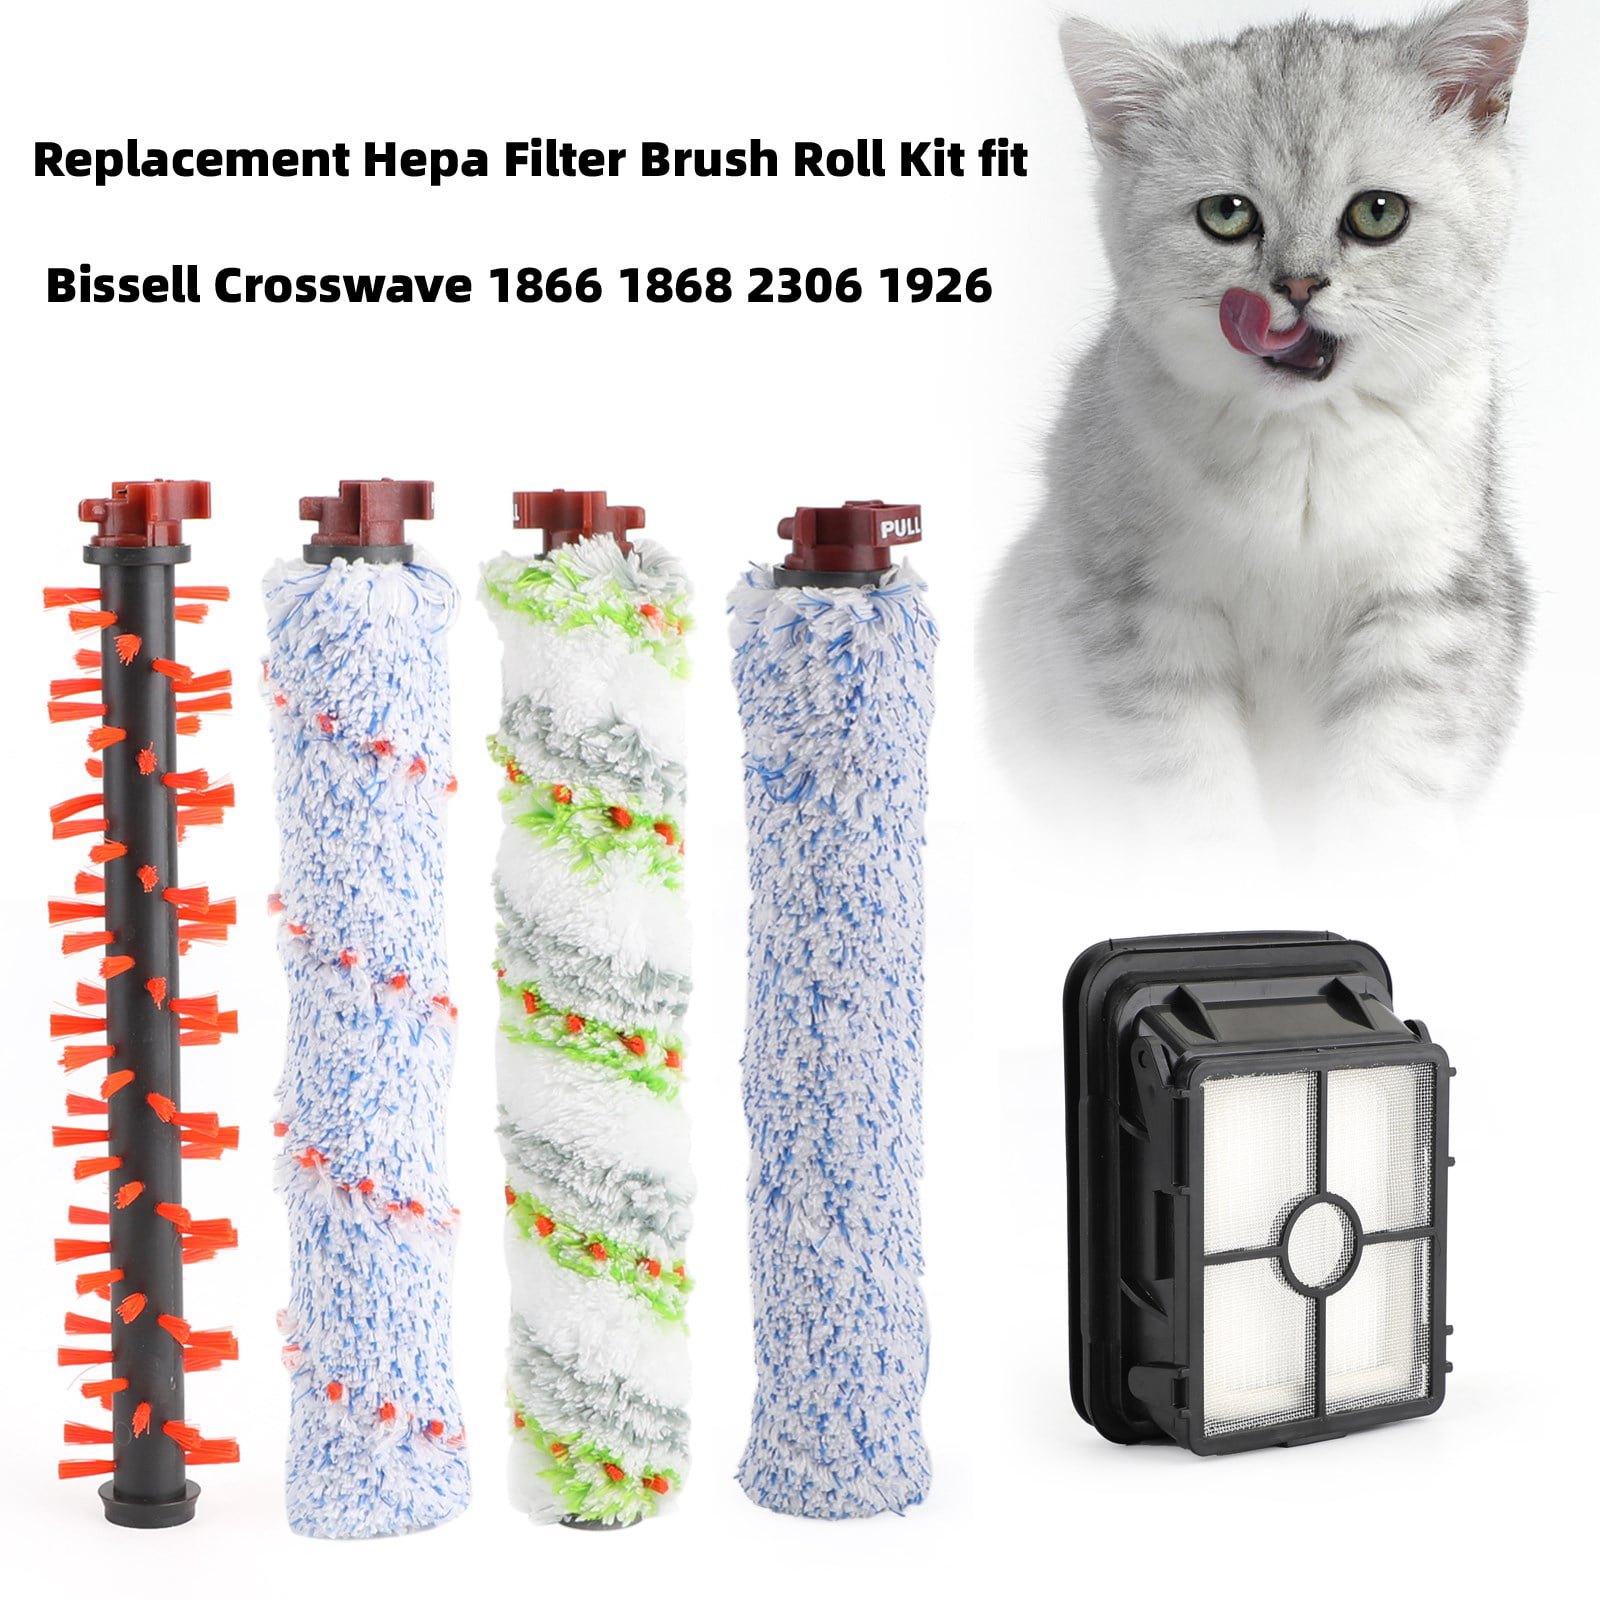 Replacement Hepa Filter Brush Roll Kit fit Bissell Crosswave 1866 1868 2306 1926 